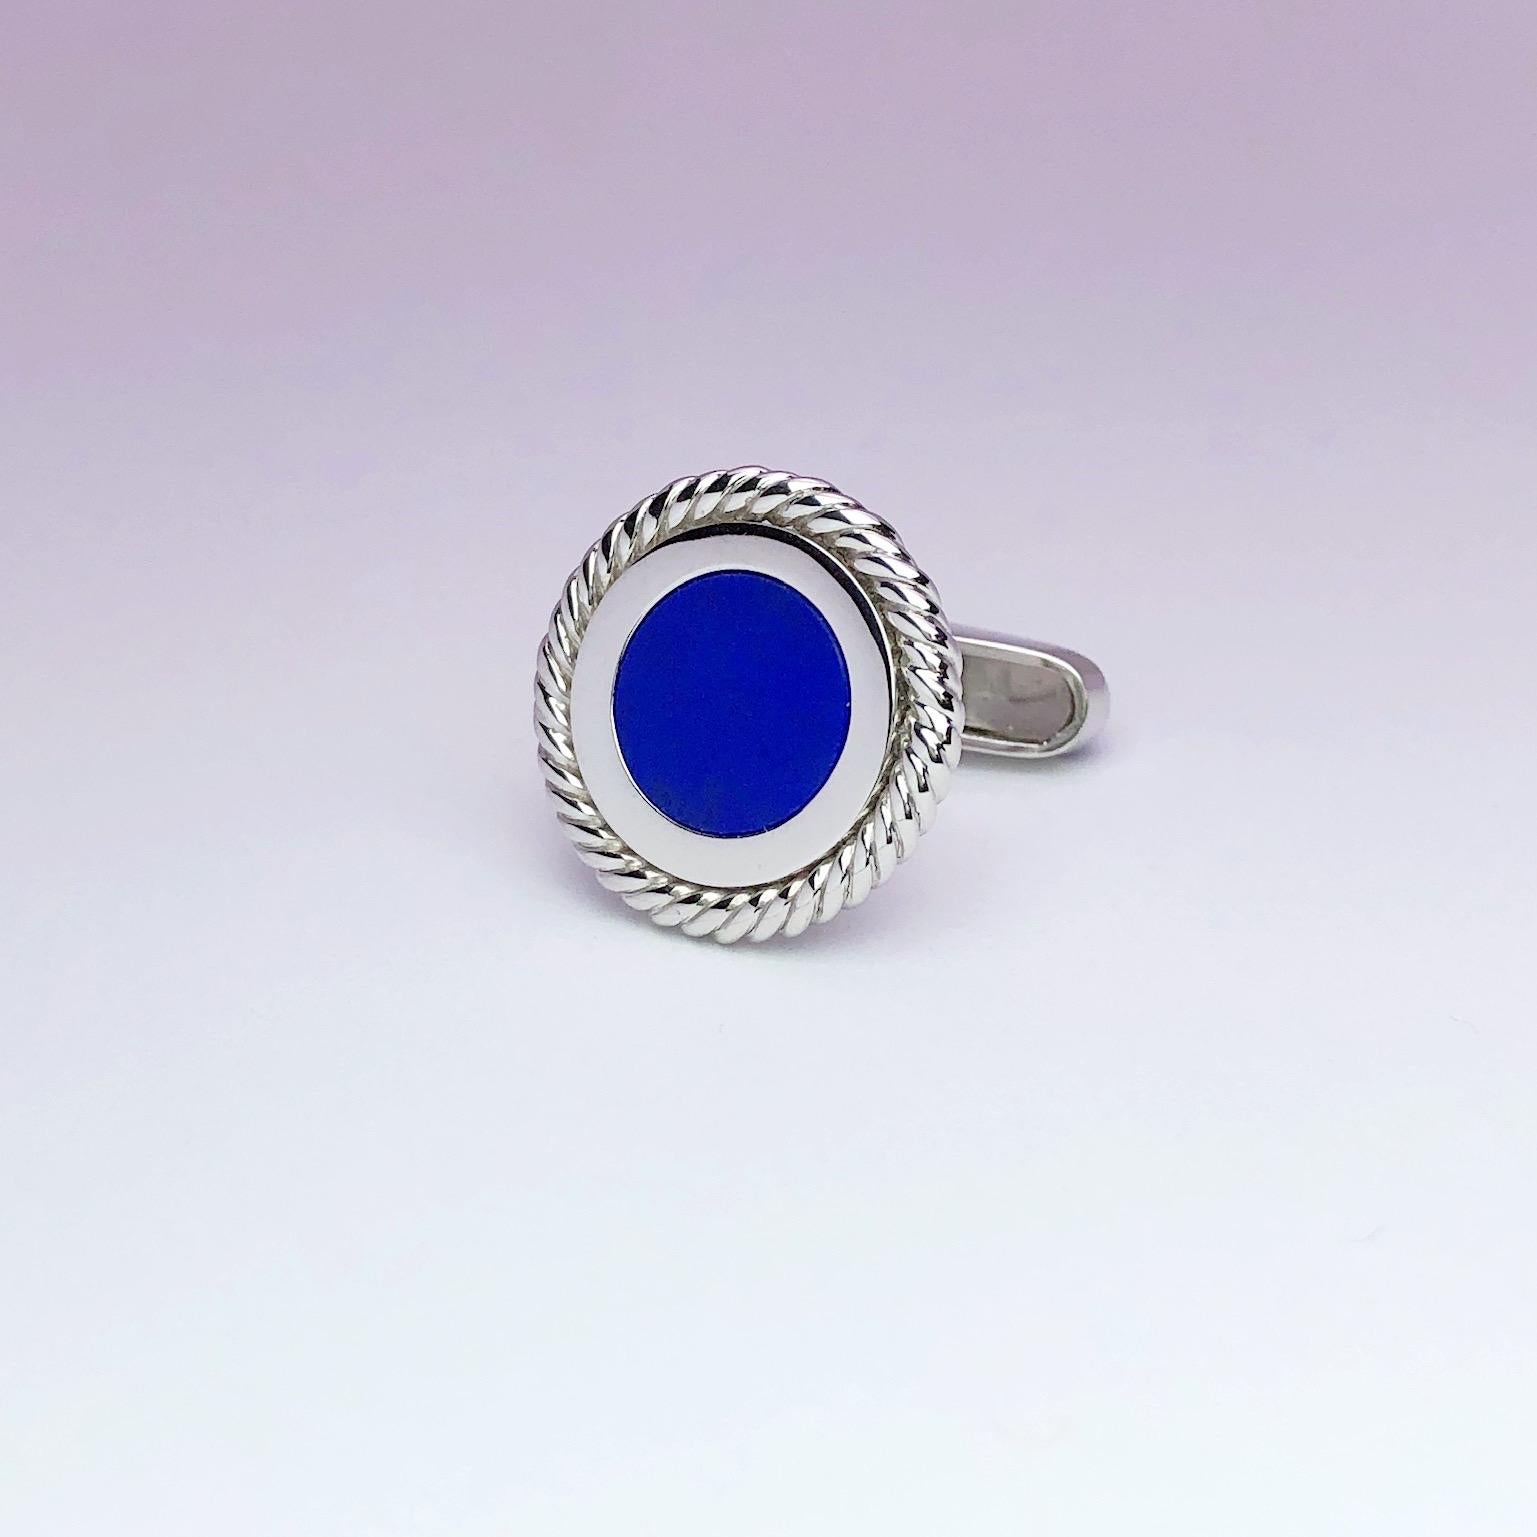 Created by George Gero, renowned worldwide for luxurious men's cuff-links, comes this classic  round pair which are set with lapis lazuli centers in a high polished 18 karat white gold braided bezel setting.
Cufflinks have collapsible backs set with